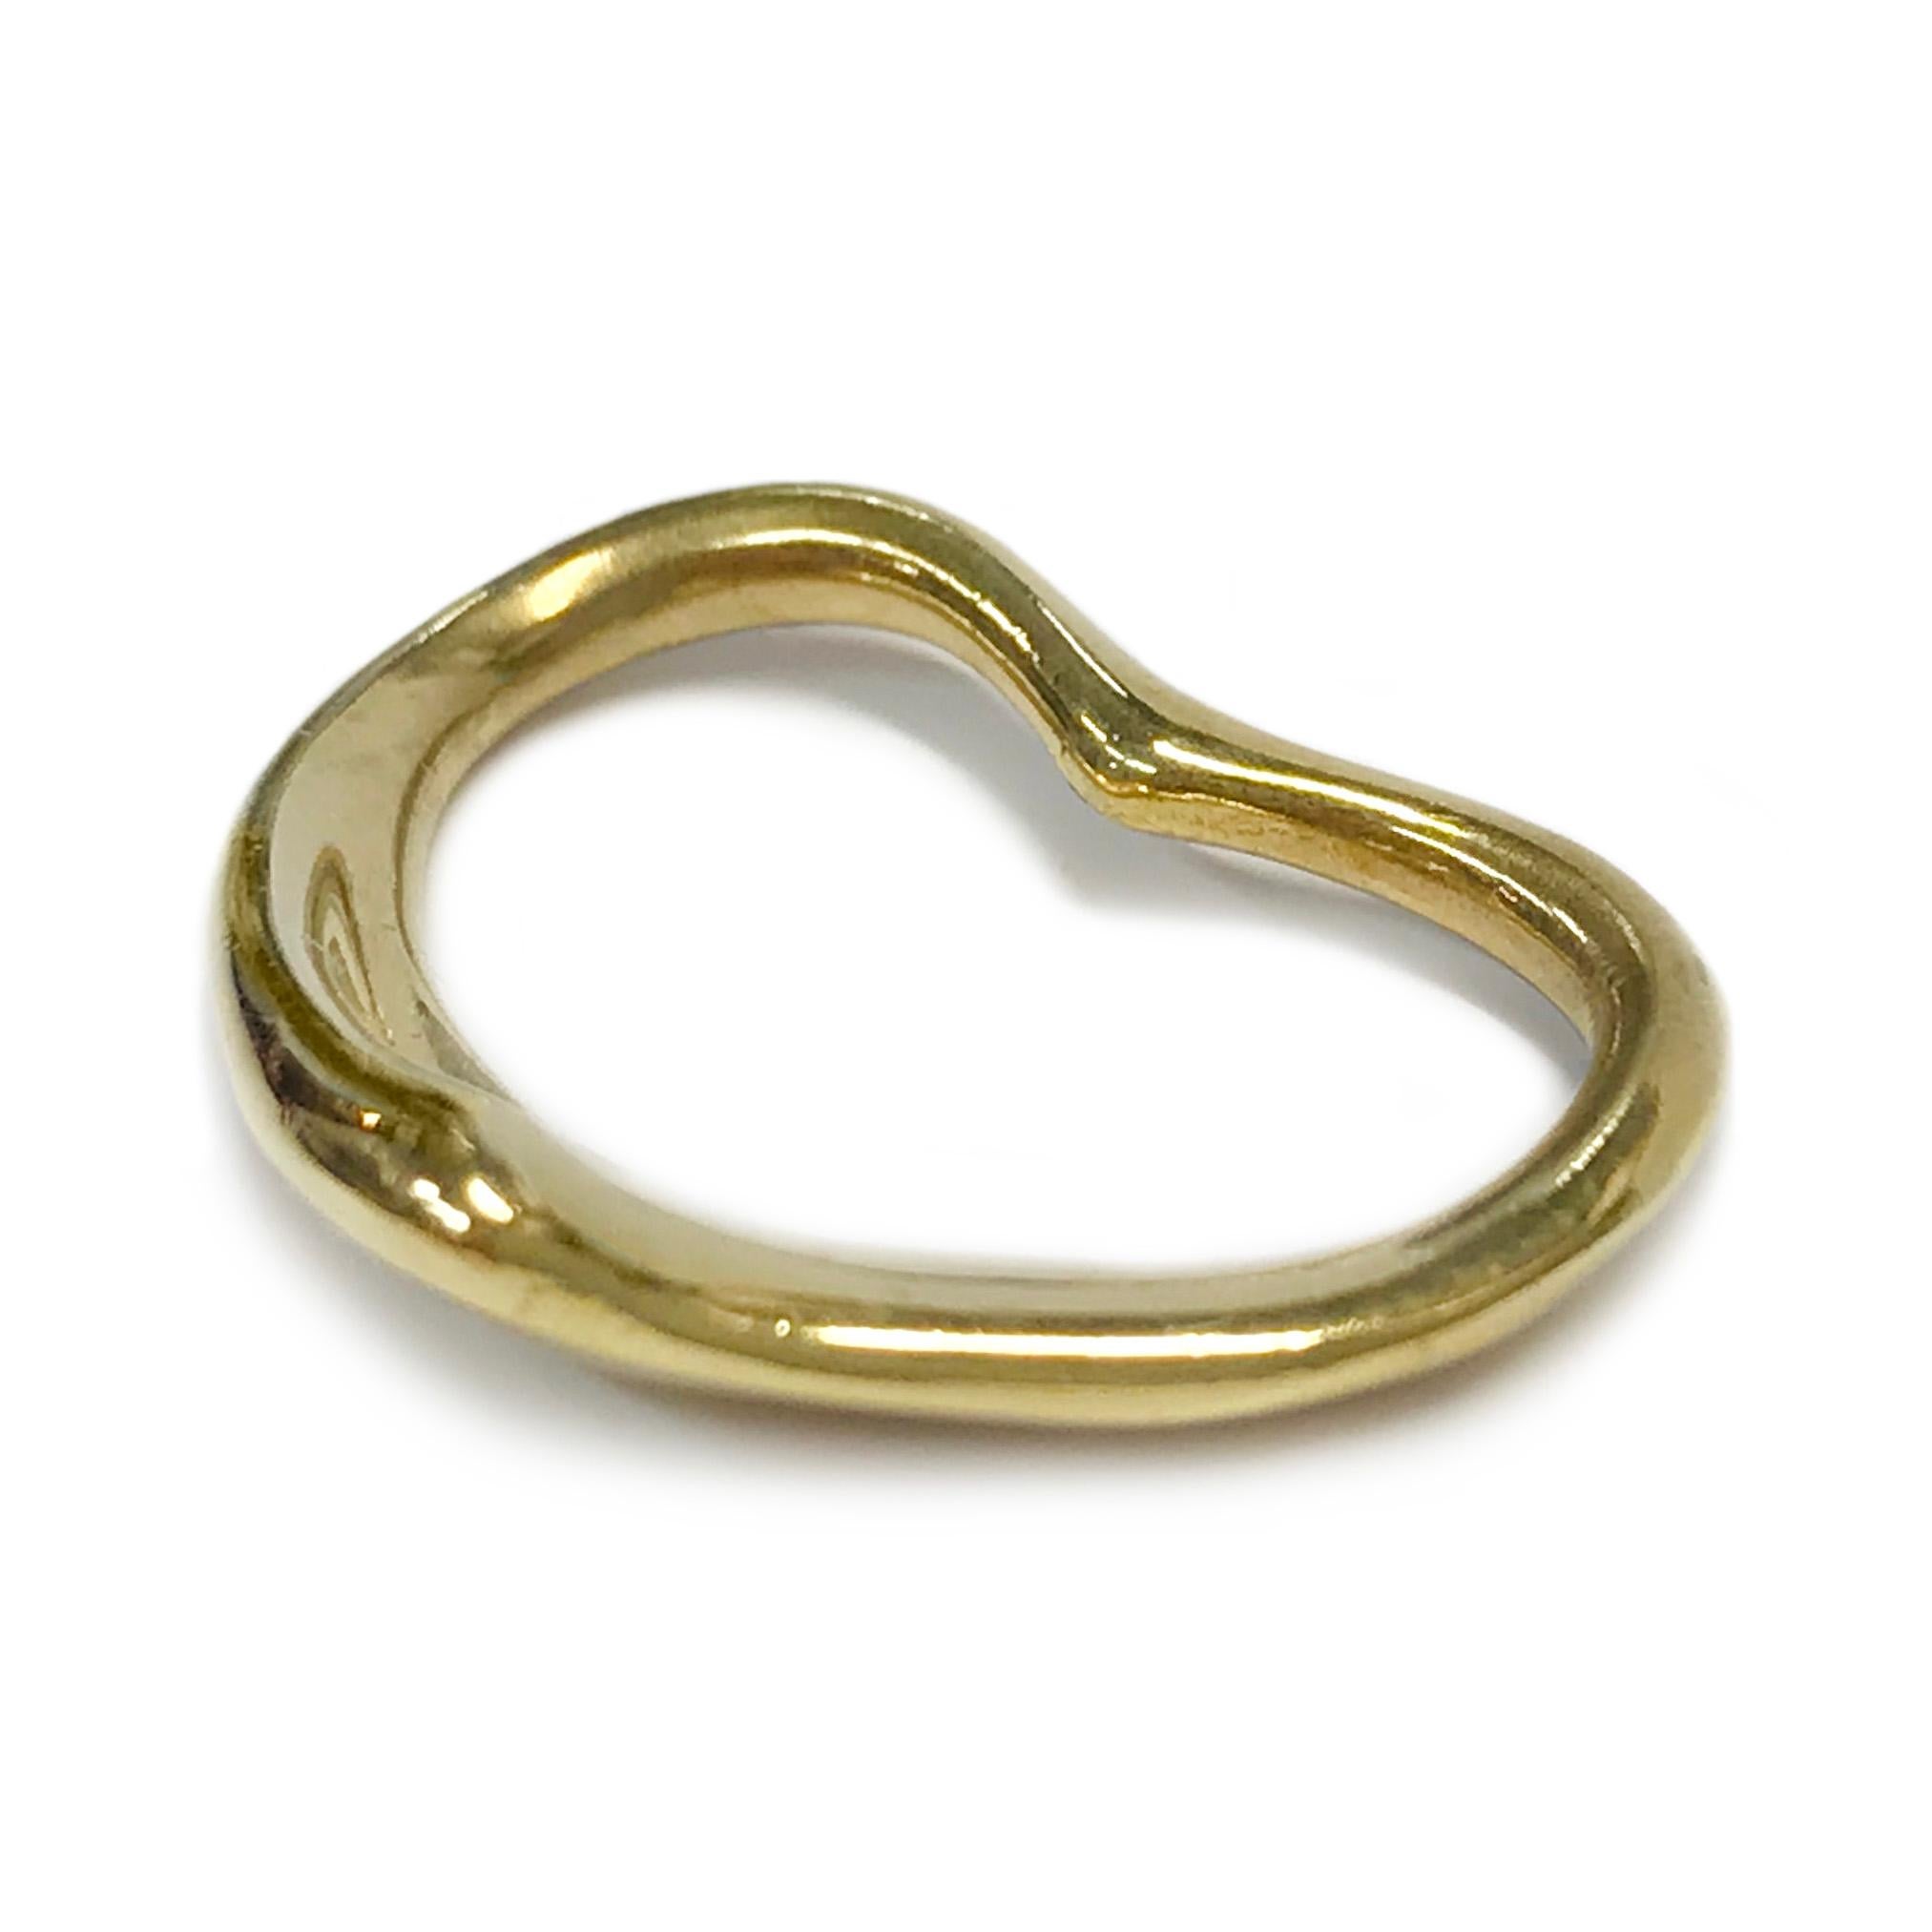 18 Karat Yellow Gold Open Heart Pendant. A simple yet elegant design that celebrates the spirit of love. Stamped on the back of the pendant is 18KT. The pendant measures 16mm in height and 20.5mm in width. The total weight of the pendant is 3.35